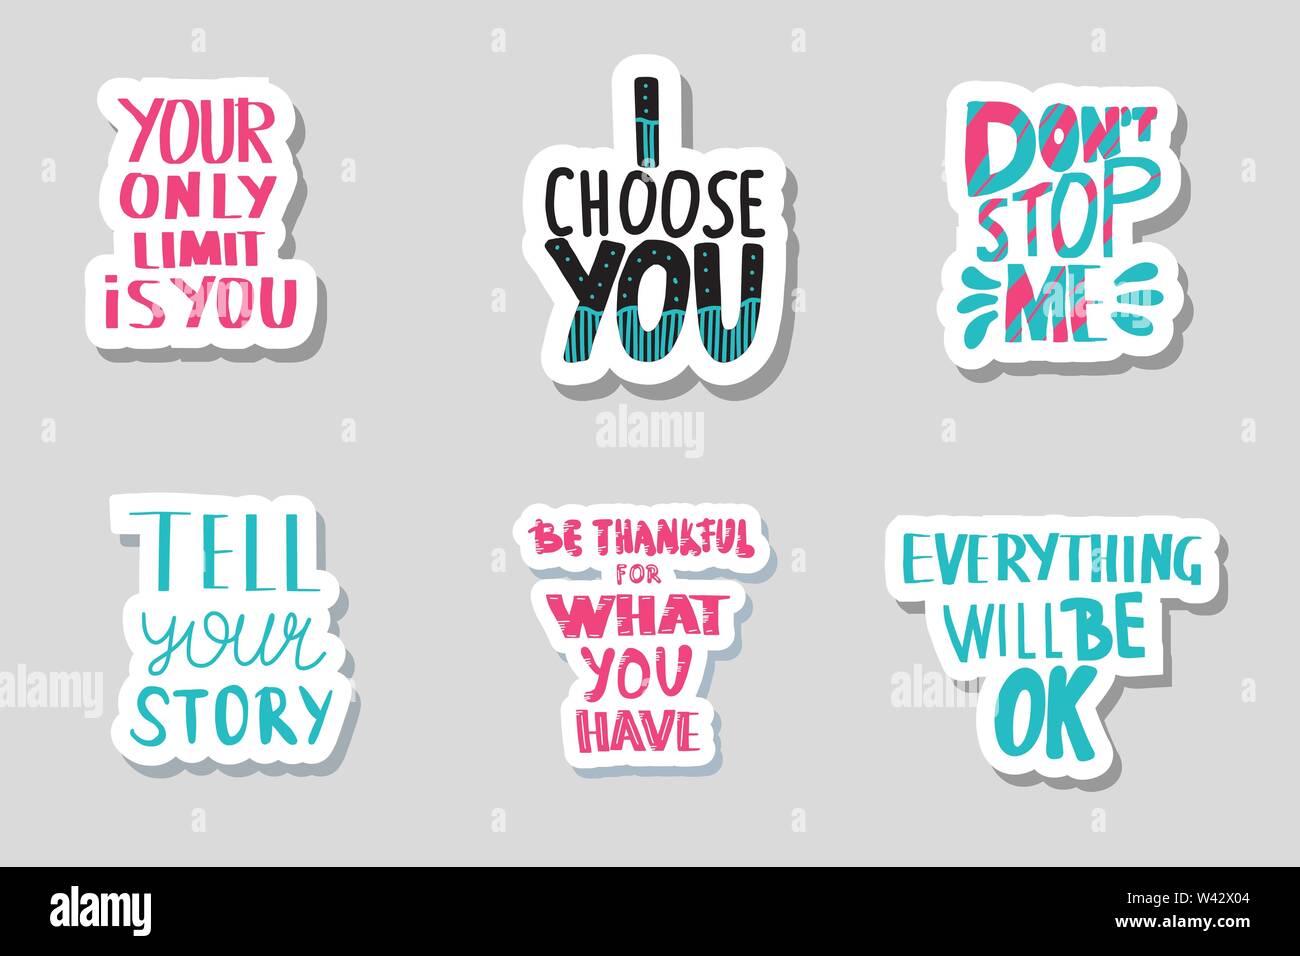 Your Only Limit Is You I Choose You Dont Stop Me Tell Your Story Be Thankful For What You Have Everything Will Be Ok Sticker Vector Quotes Isolat Stock Vector Image